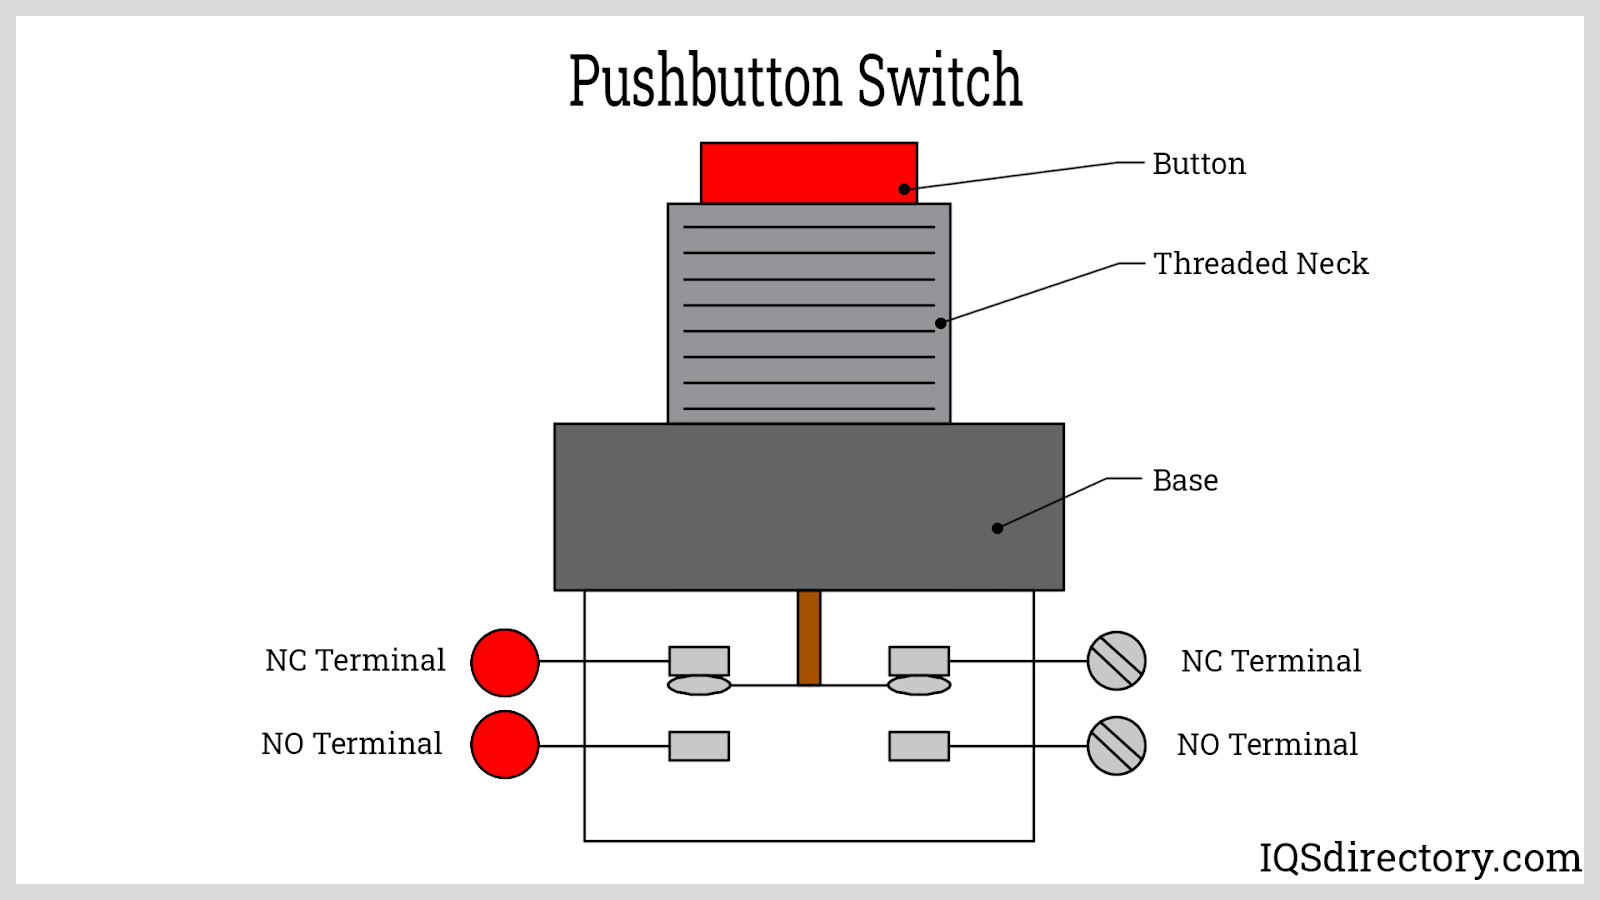 Push Button Switch Wiring: What It Is, Features, Types, How It